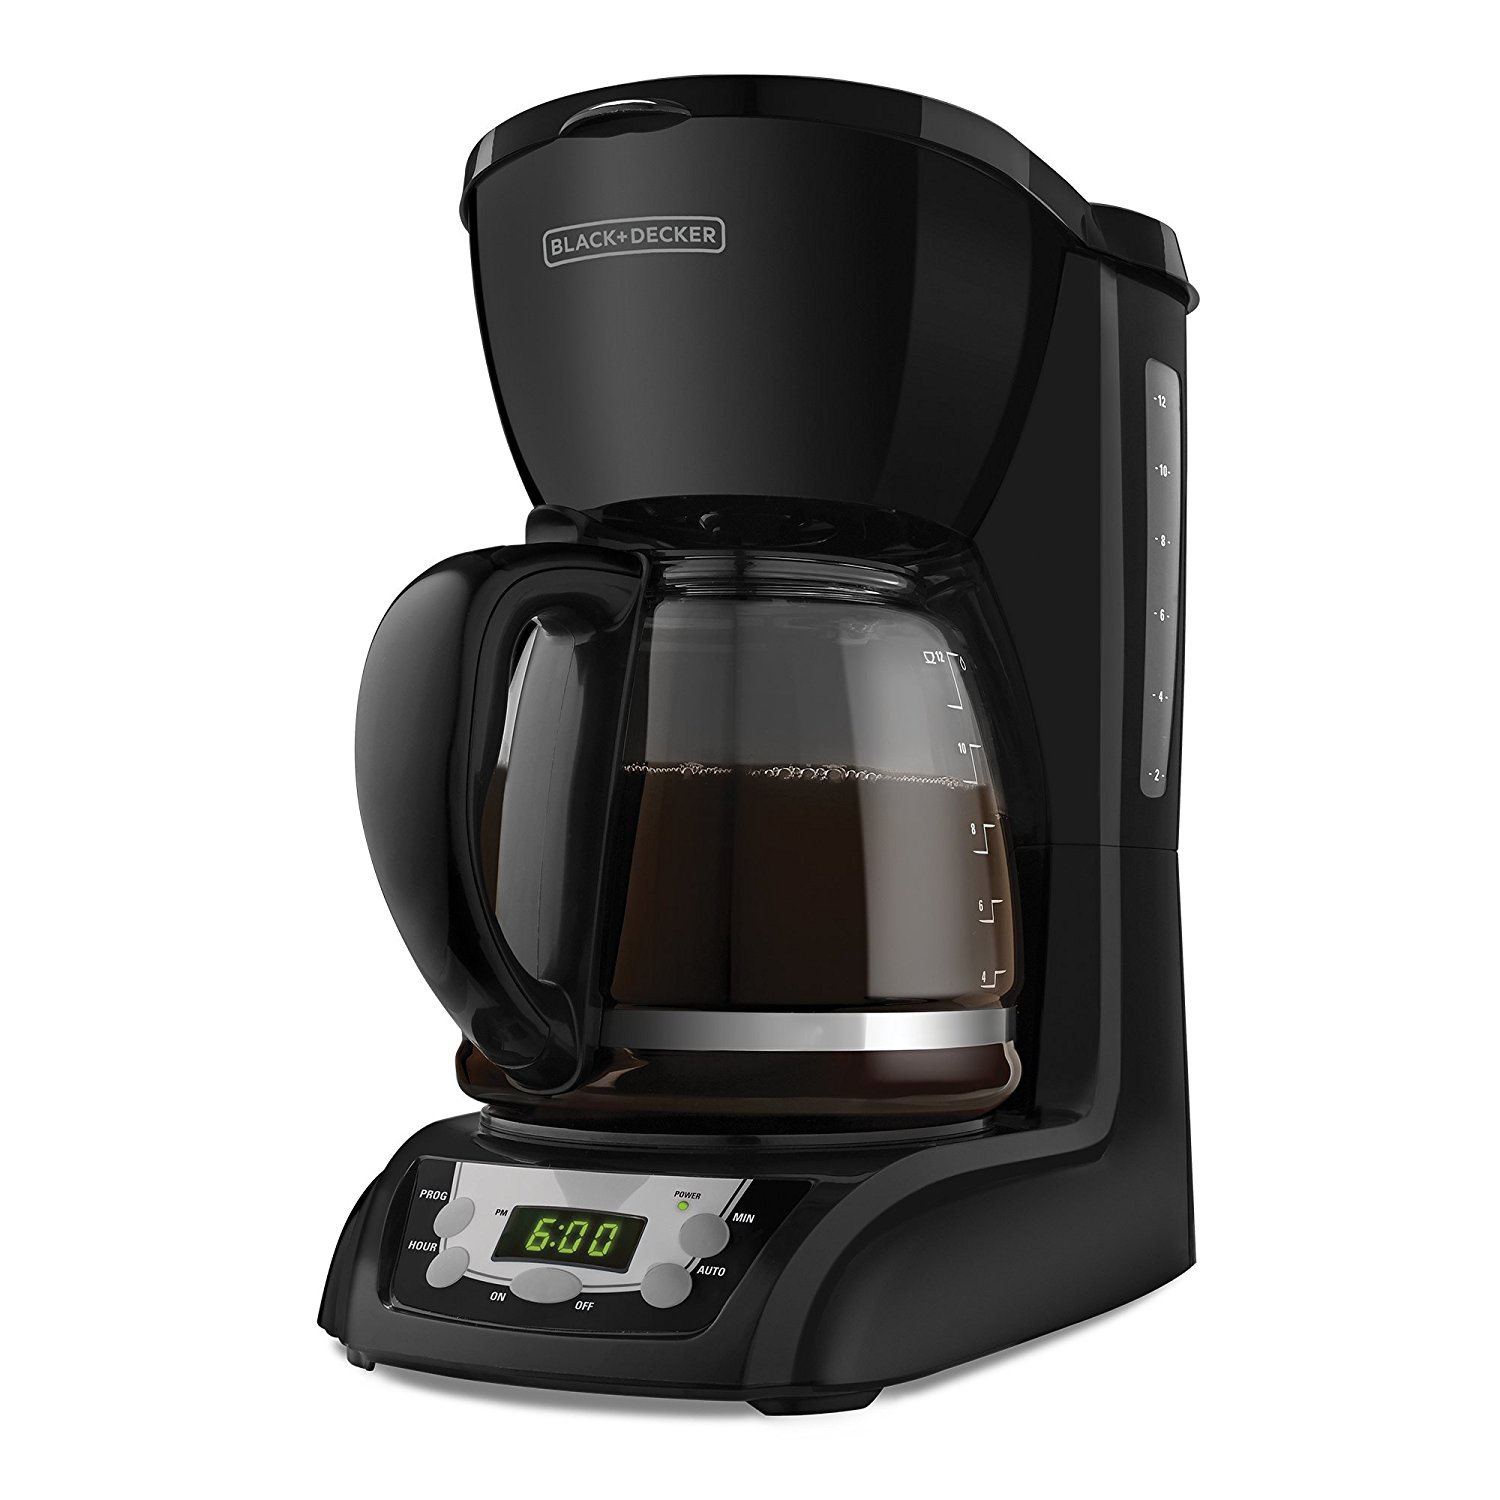 BLACK+DECKER DLX1050B 12-Cup Programmable Coffeemaker with Glass Carafe, Black